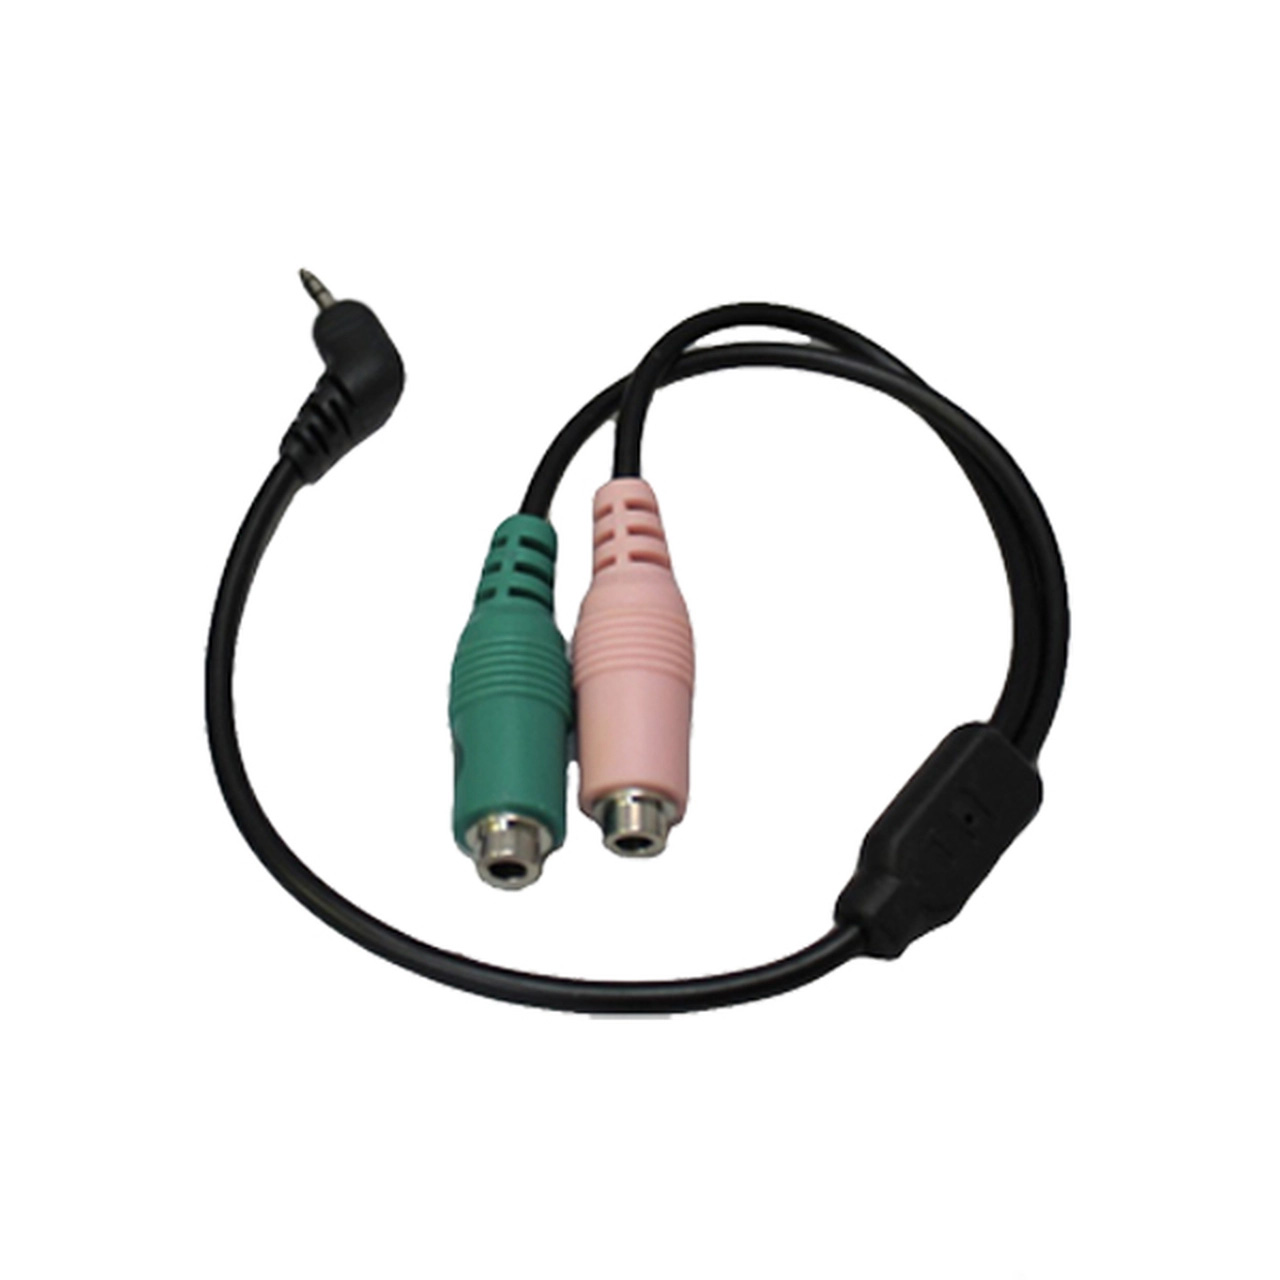 Headset Buddy Xbox 360 PC Headset Adapter Cable